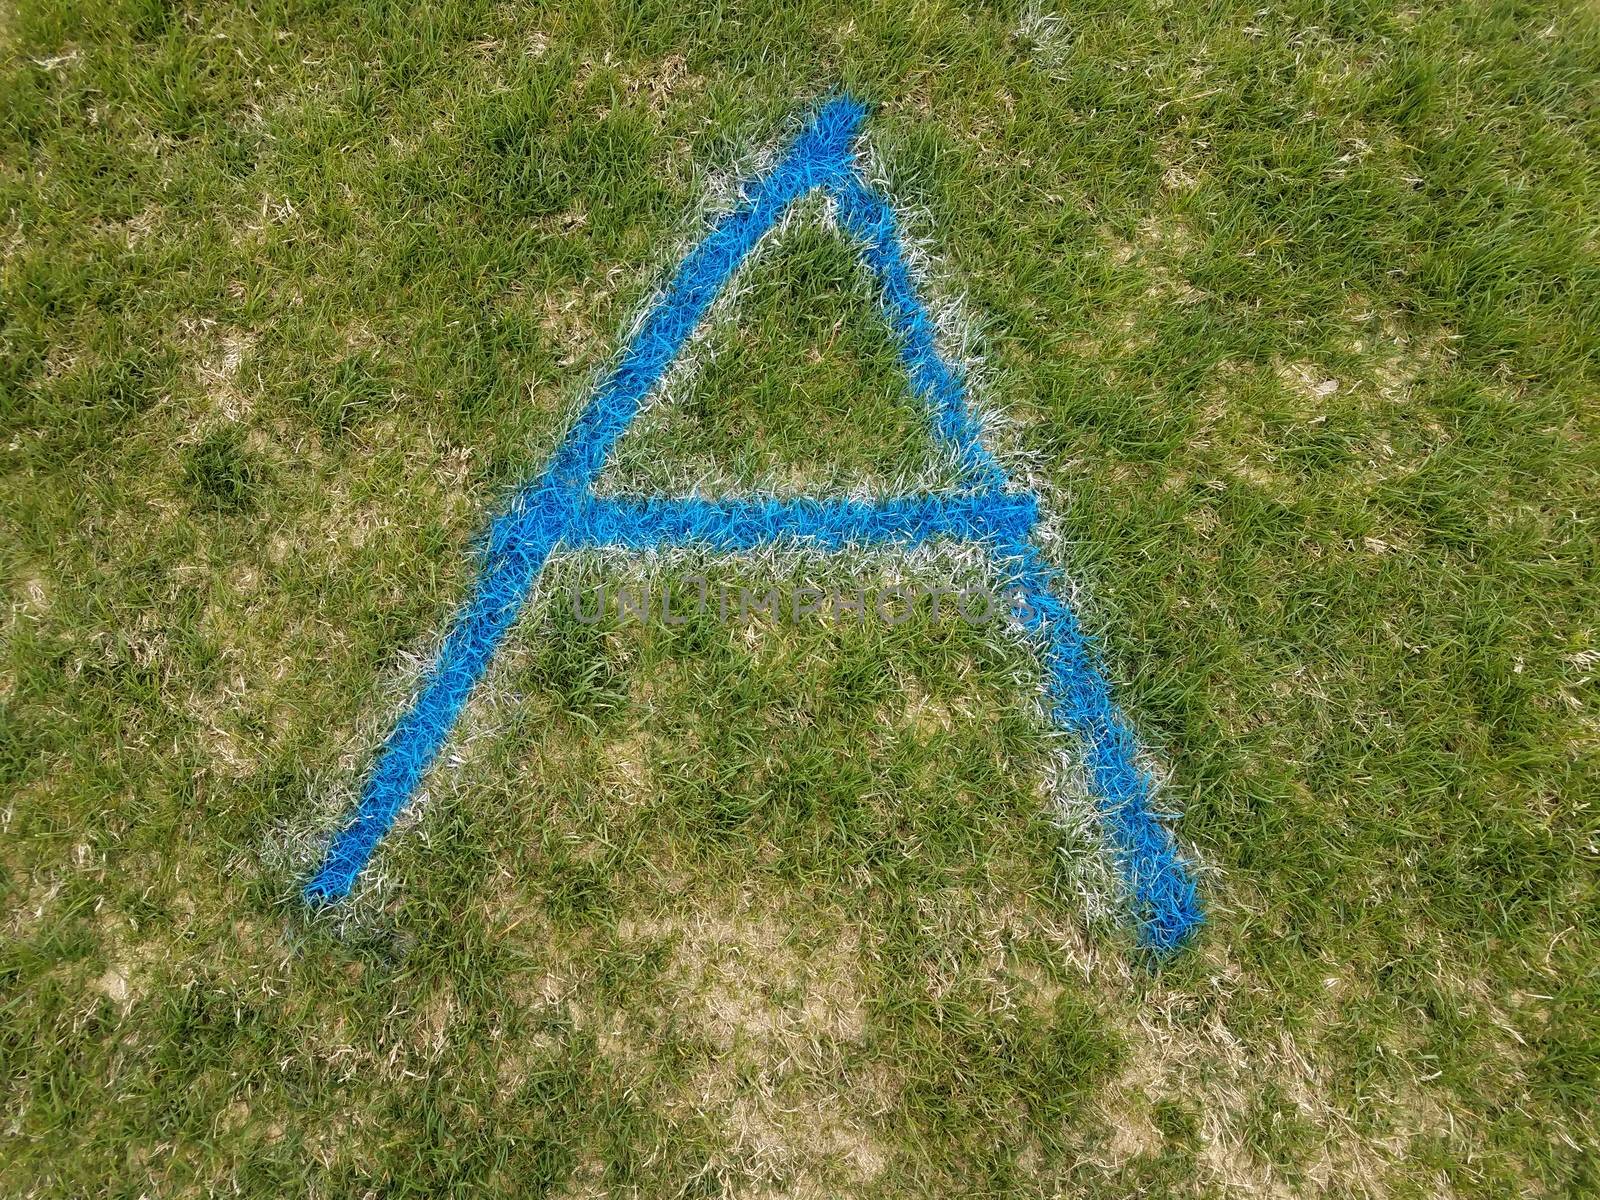 blue letter A spray painted on green grass by stockphotofan1